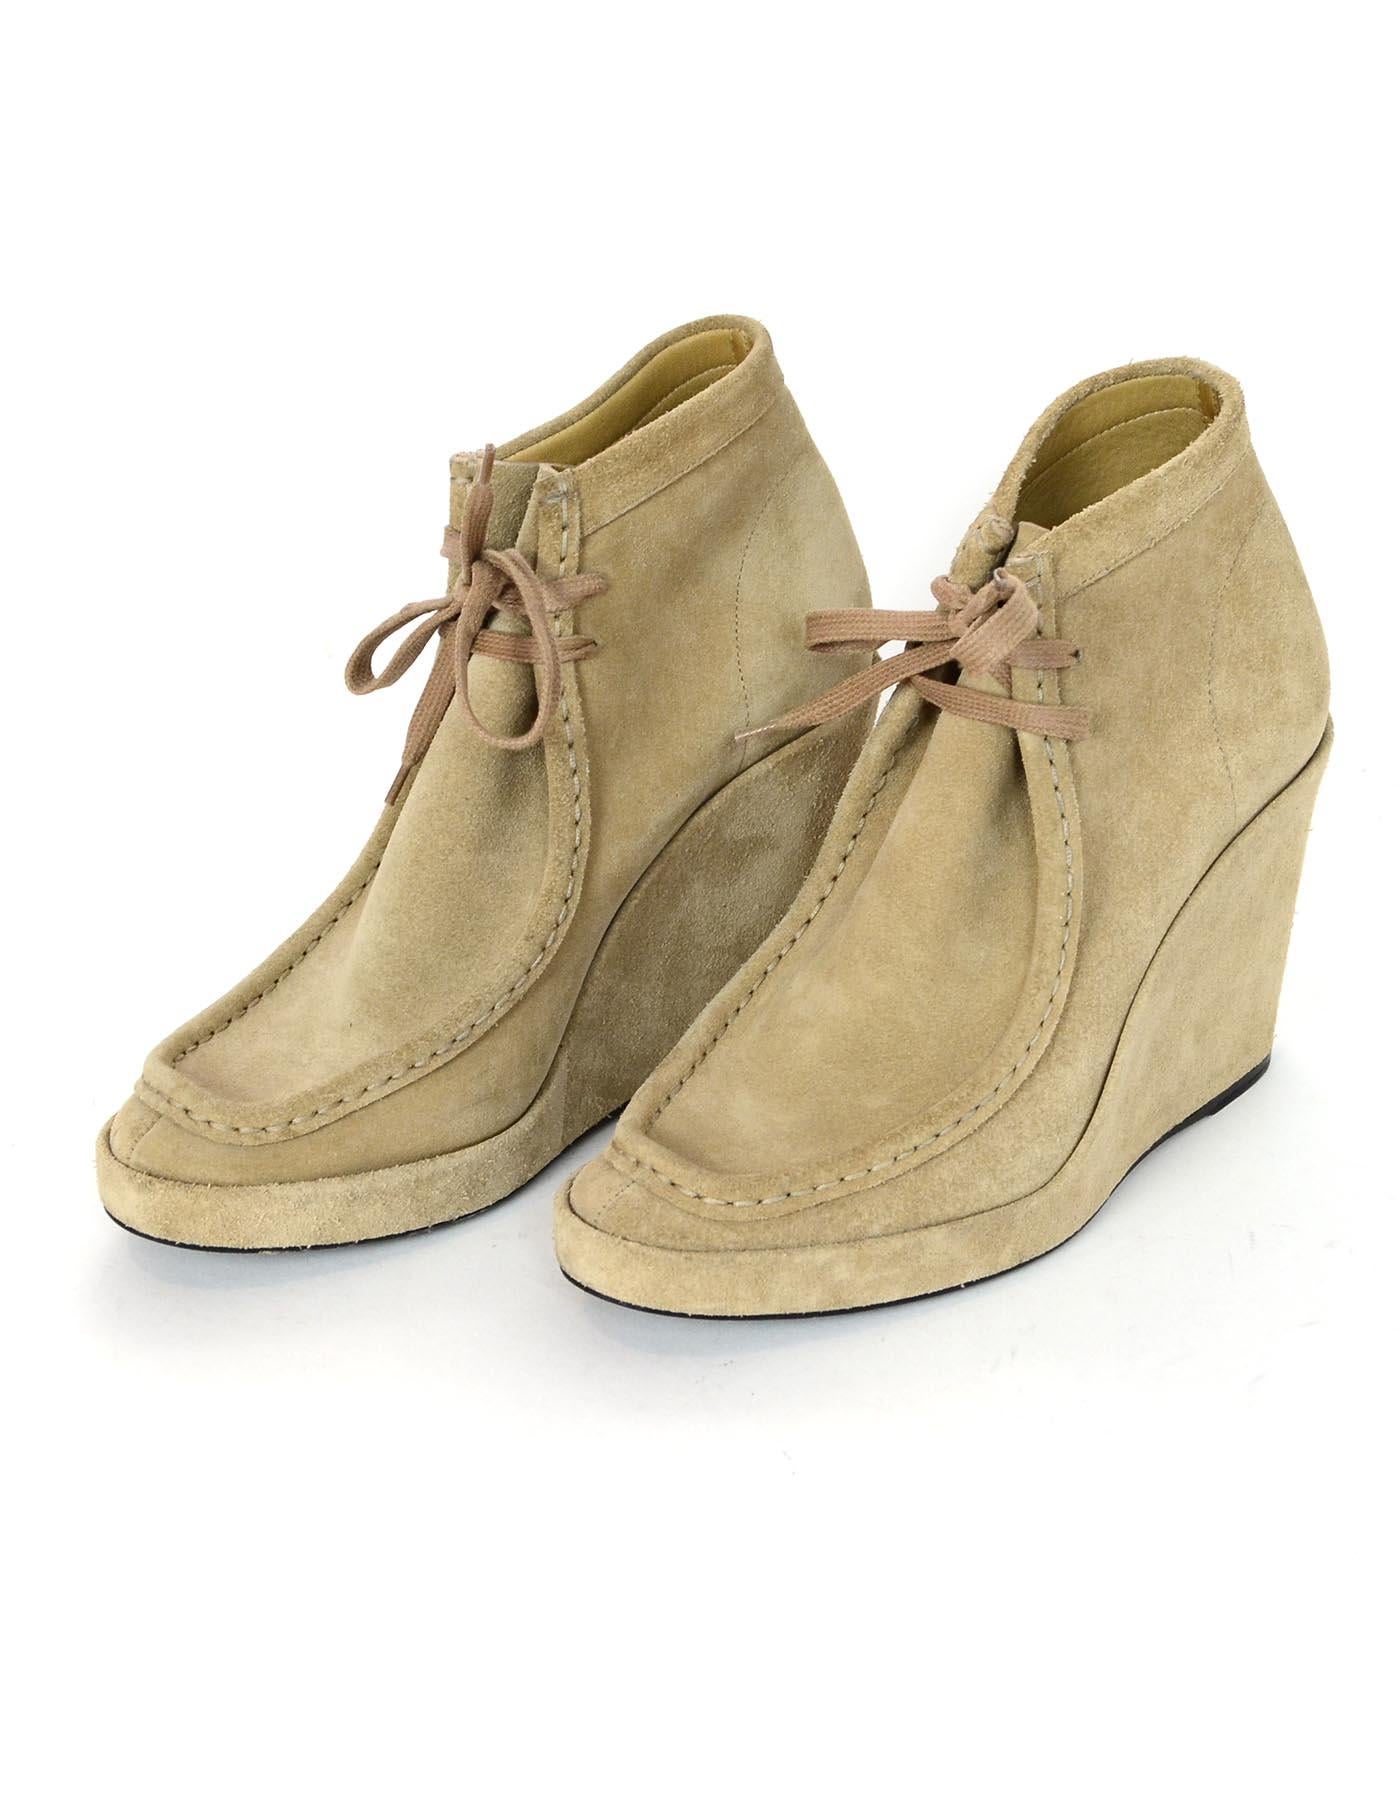 Balenciaga Tan Suede Wedge Lace Front Ankle Boots Sz 39

Made In: Italy
Color: Tan
Materials: Suede
Closure/Opening: Lace up front
Overall Condition: Excellent pre-owned condition with exception of minor scuffing on back of heel and sides 